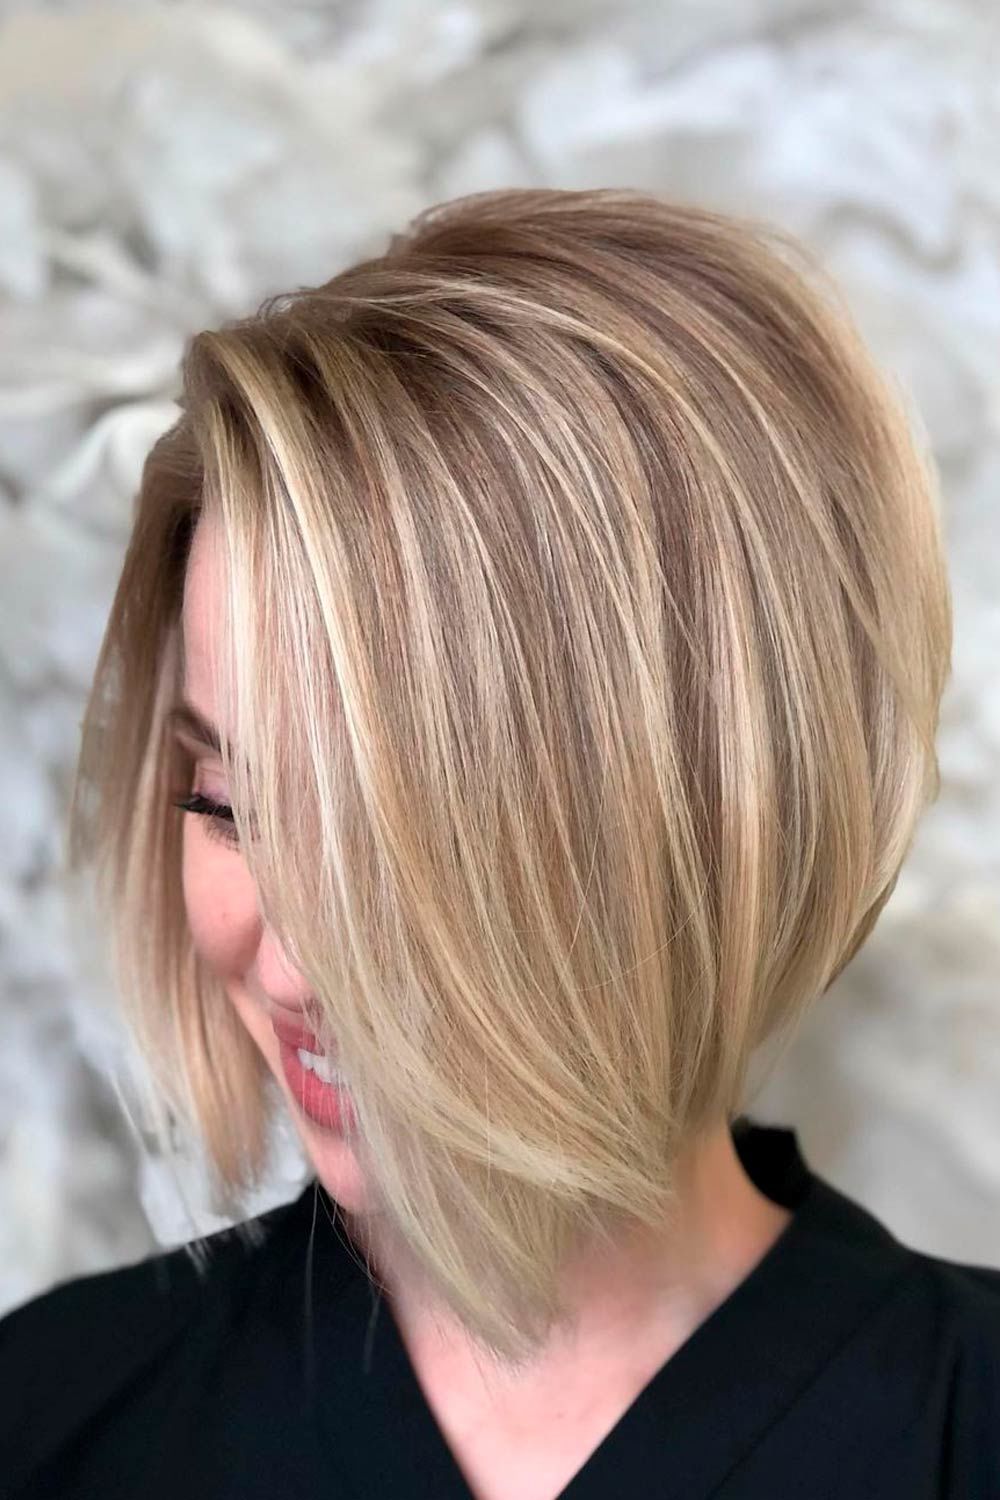 Short Hairstyles for Heart face 24 Heart shape face hairstyle female | Heart shaped face hairstyles female | Short Hairstyles for Heart Face Short Hairstyles for Heart Face Women